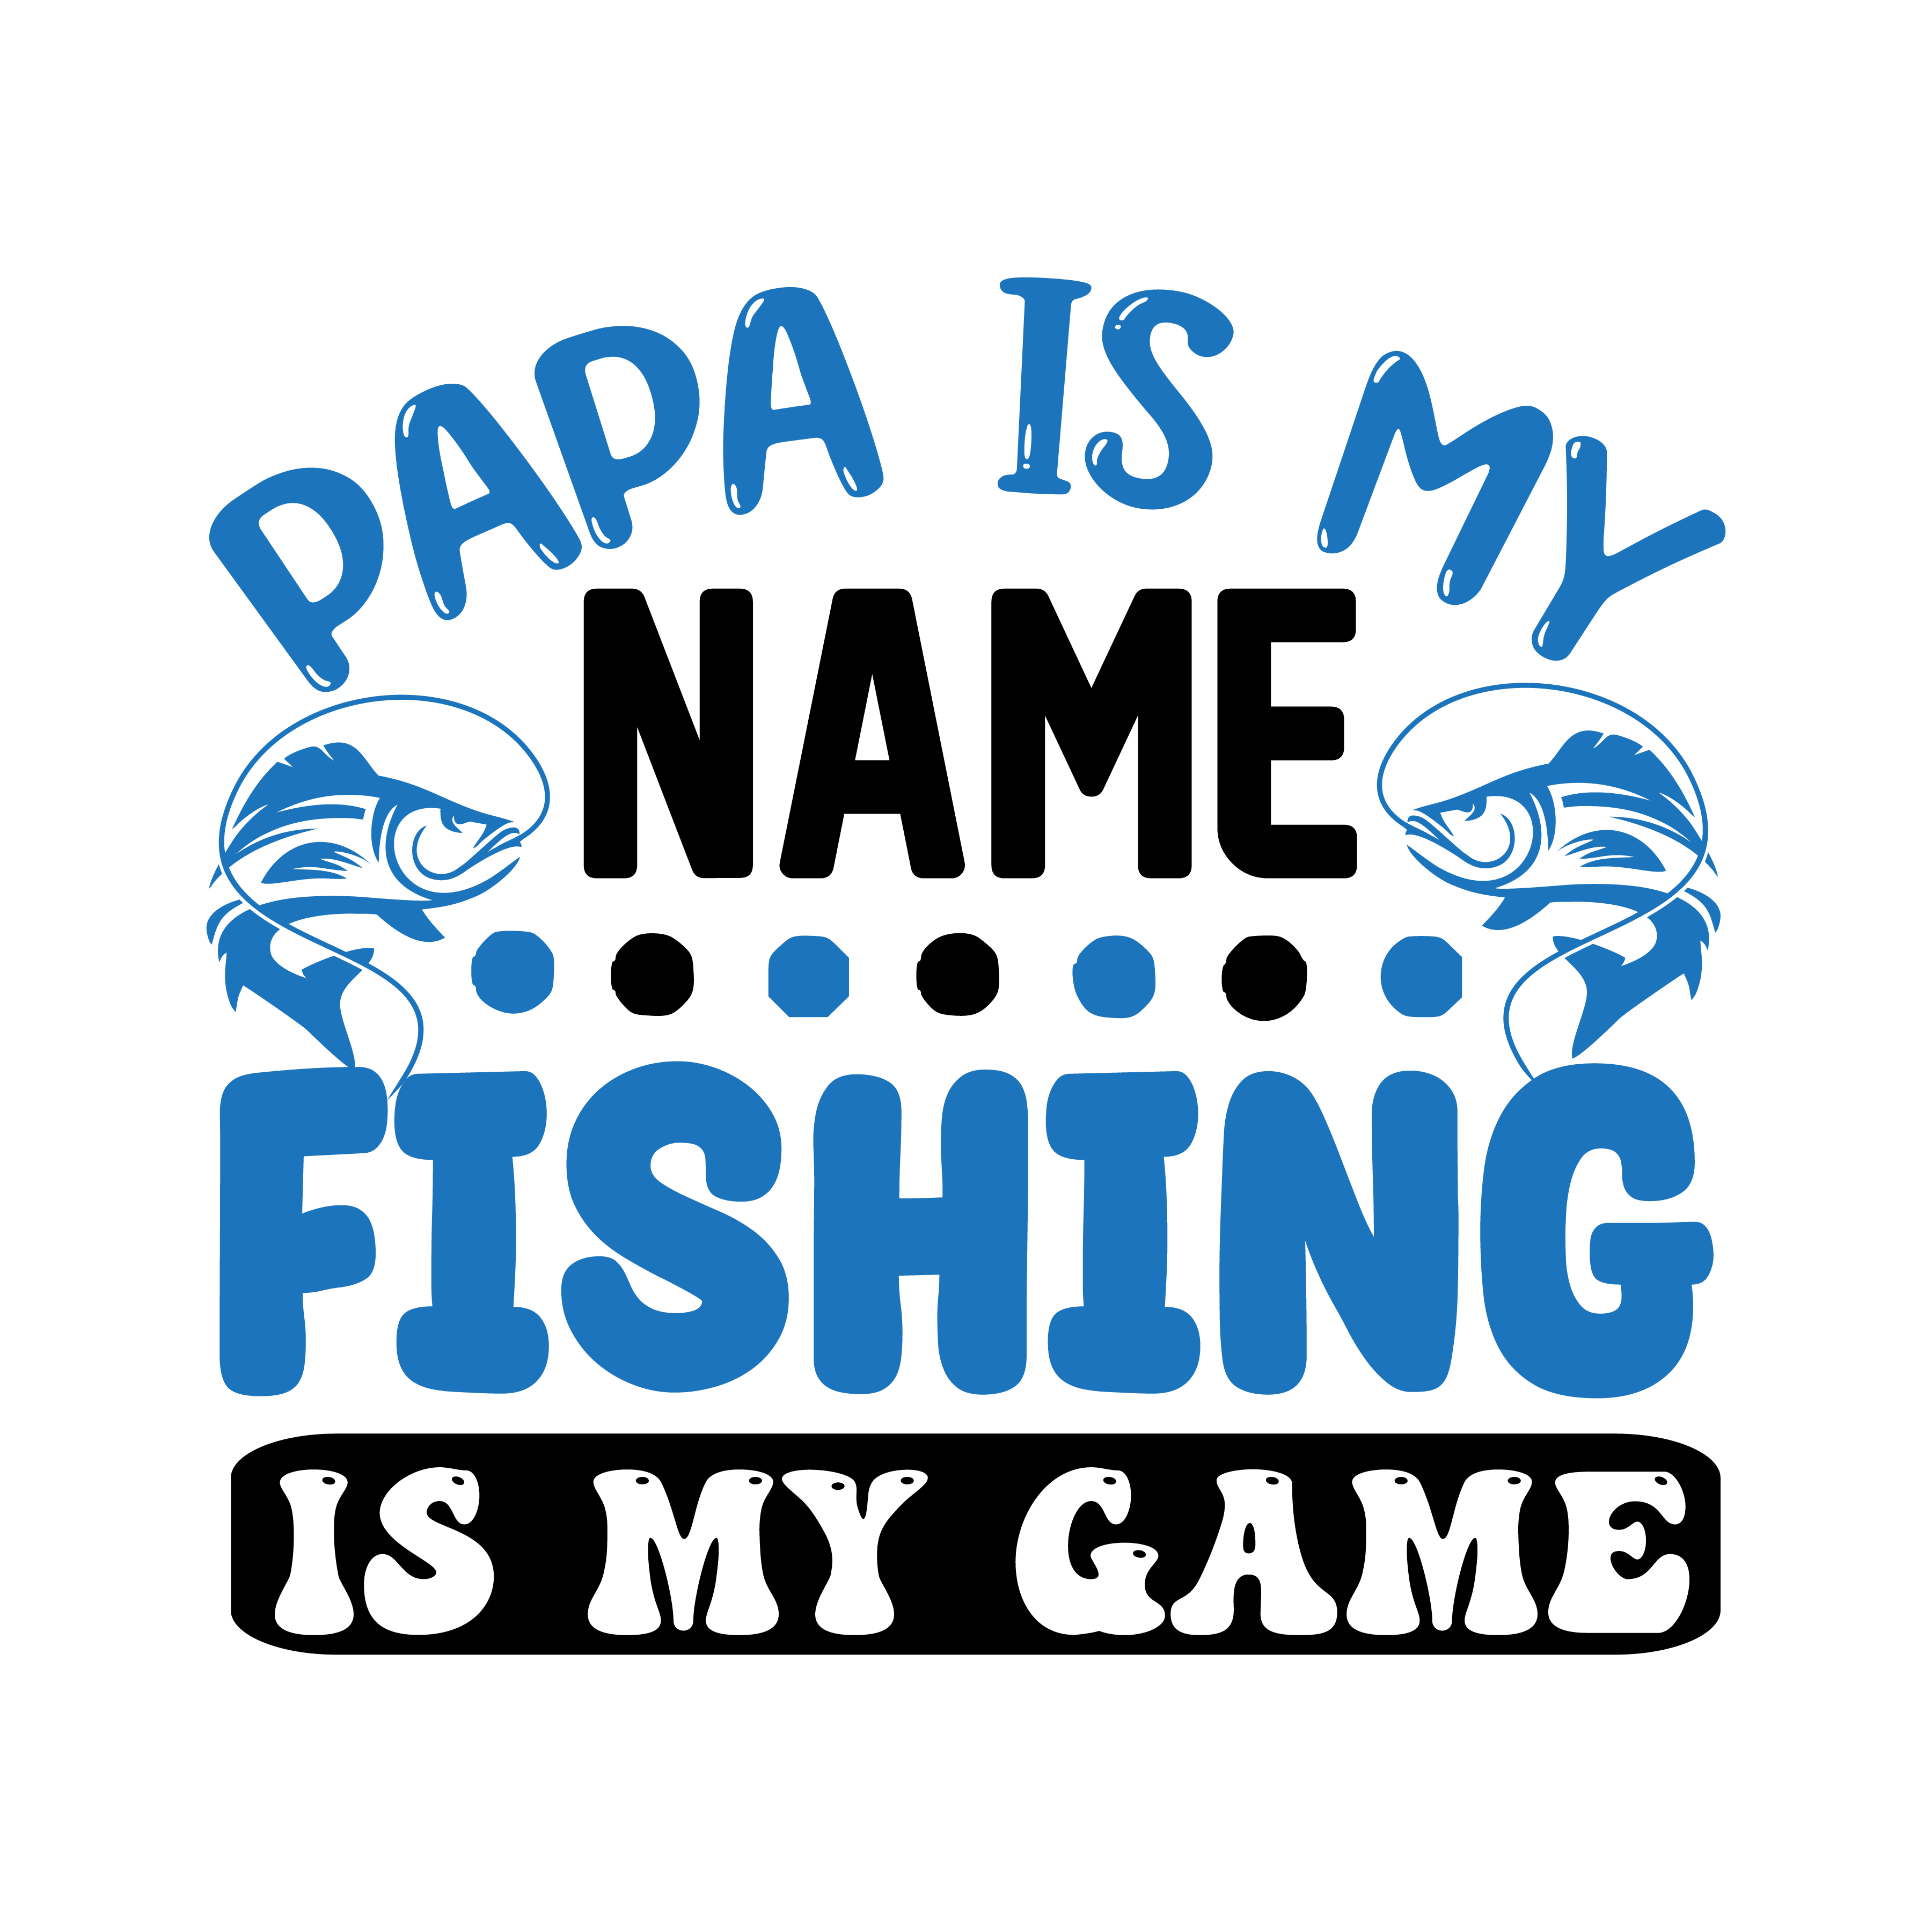 papa is my name fishing is my game, Fishing quotes, fishing sayings, Cricut designs, free, clip art, svg file, template, pattern, stencil, silhouette, cut file, design space, short, funny, shirt, cup, DIY crafts and projects, embroidery